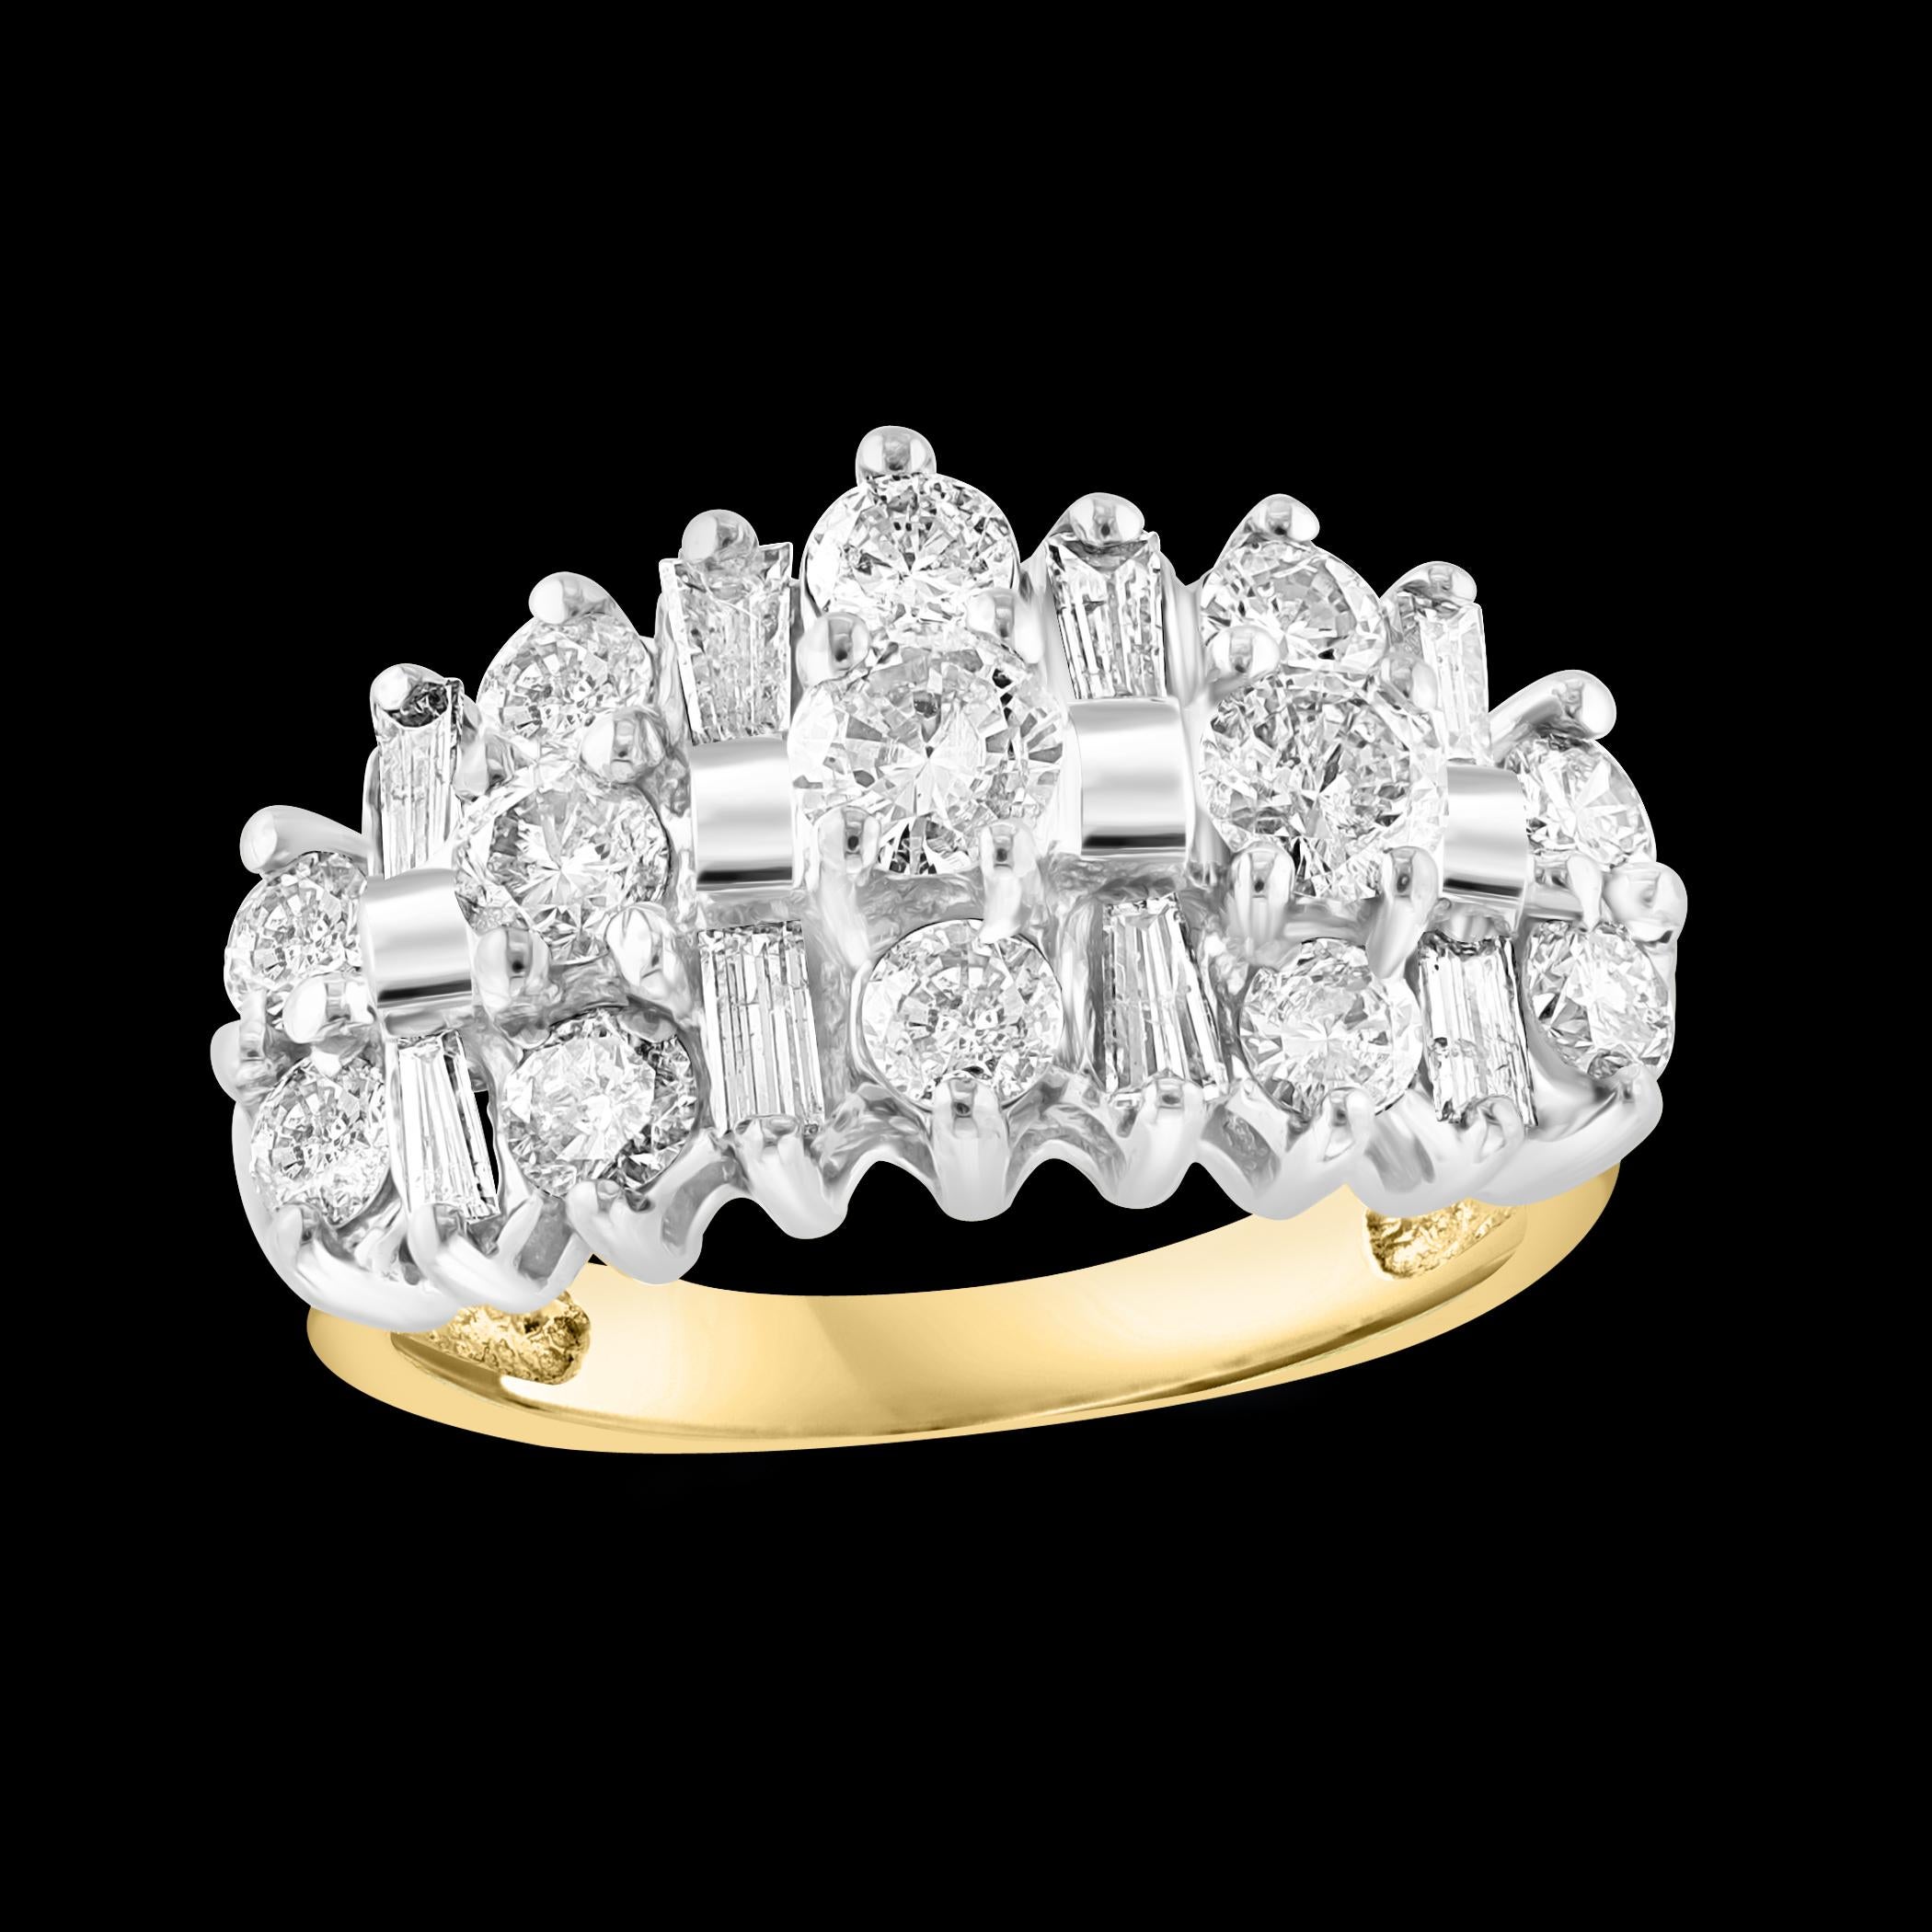 2.8 Carat Round & Baguettes Diamond Ring in 14 Karat White Gold Size 6 For Sale 9